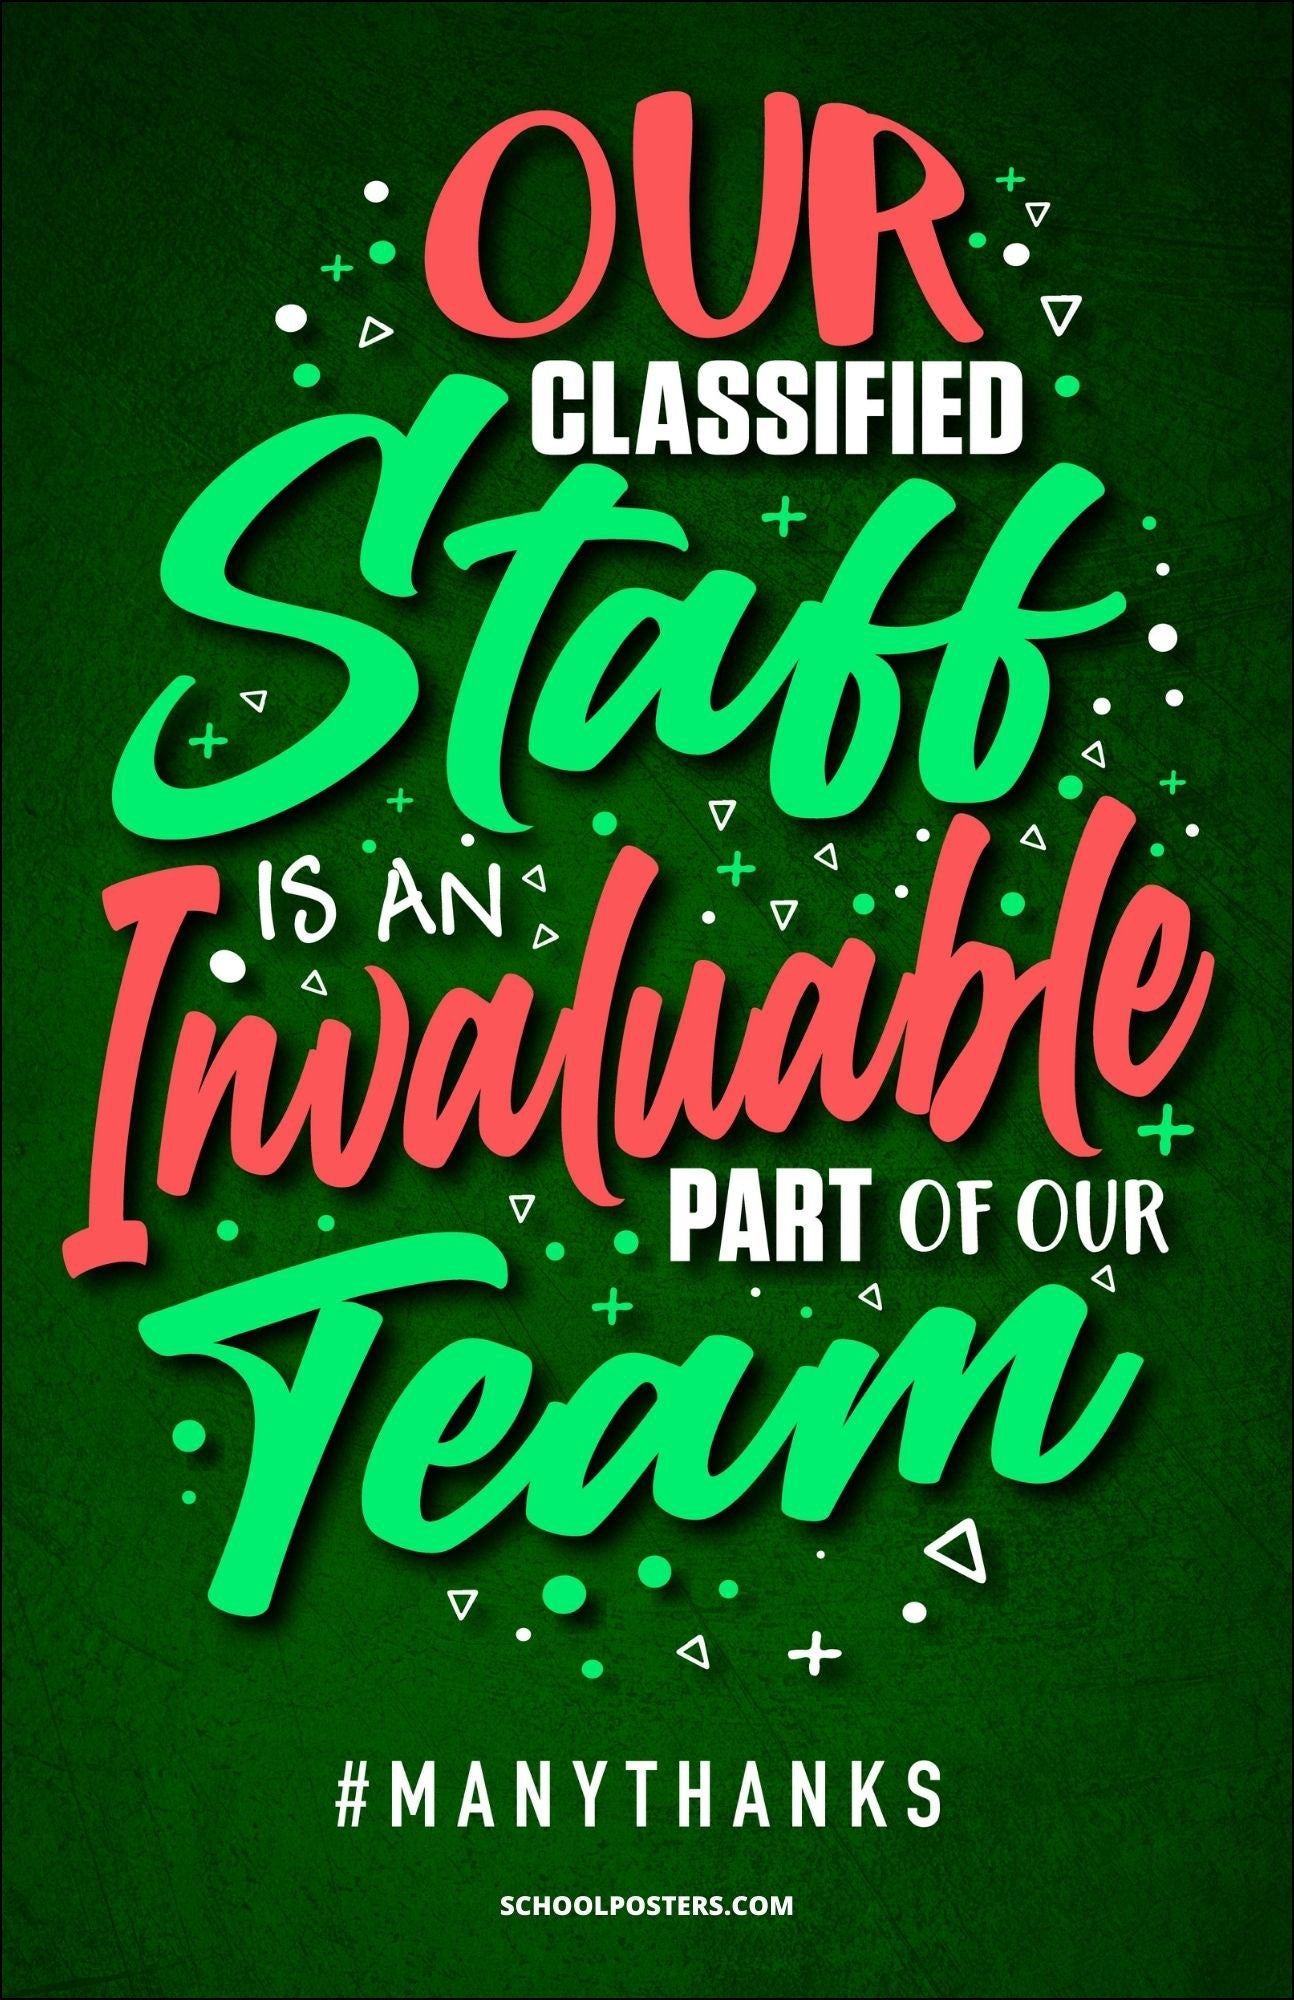 Thank You Classified Staff Poster